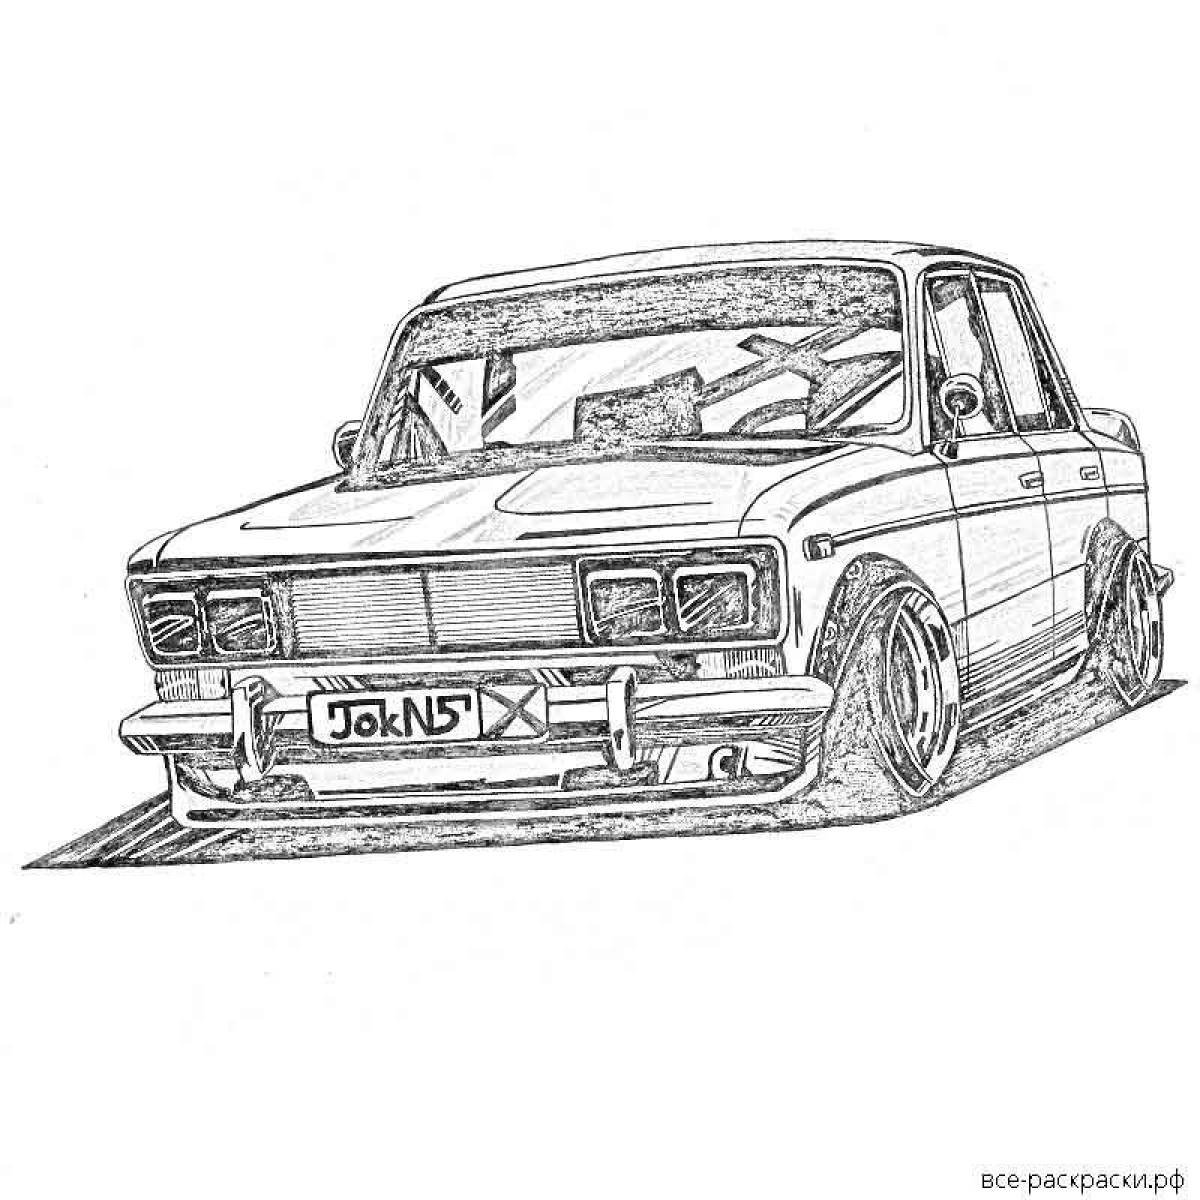 Playful coloring of vaz 2107